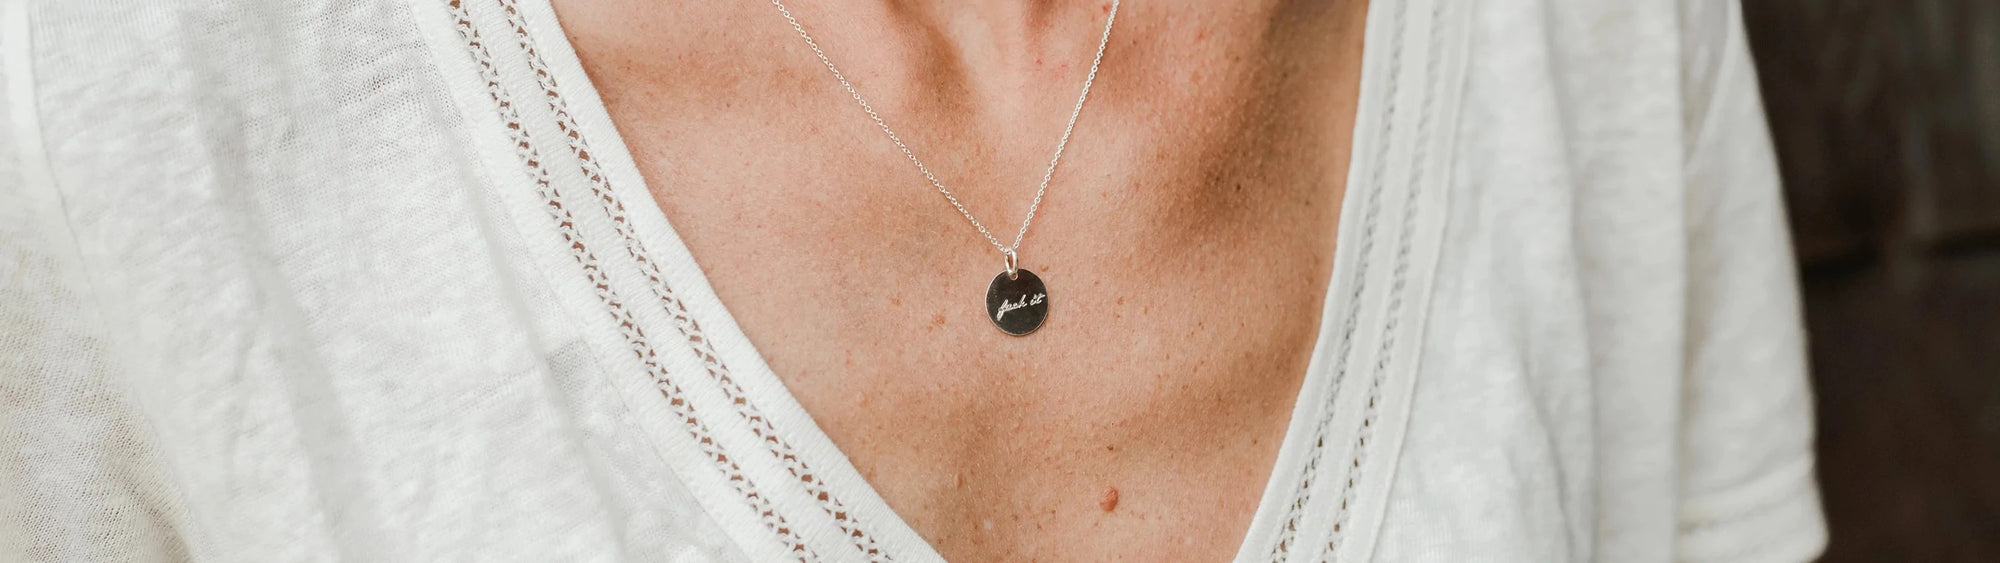 Close-up of a person wearing a white v-neck shirt with a silver necklace featuring a round pendant that says "mama.